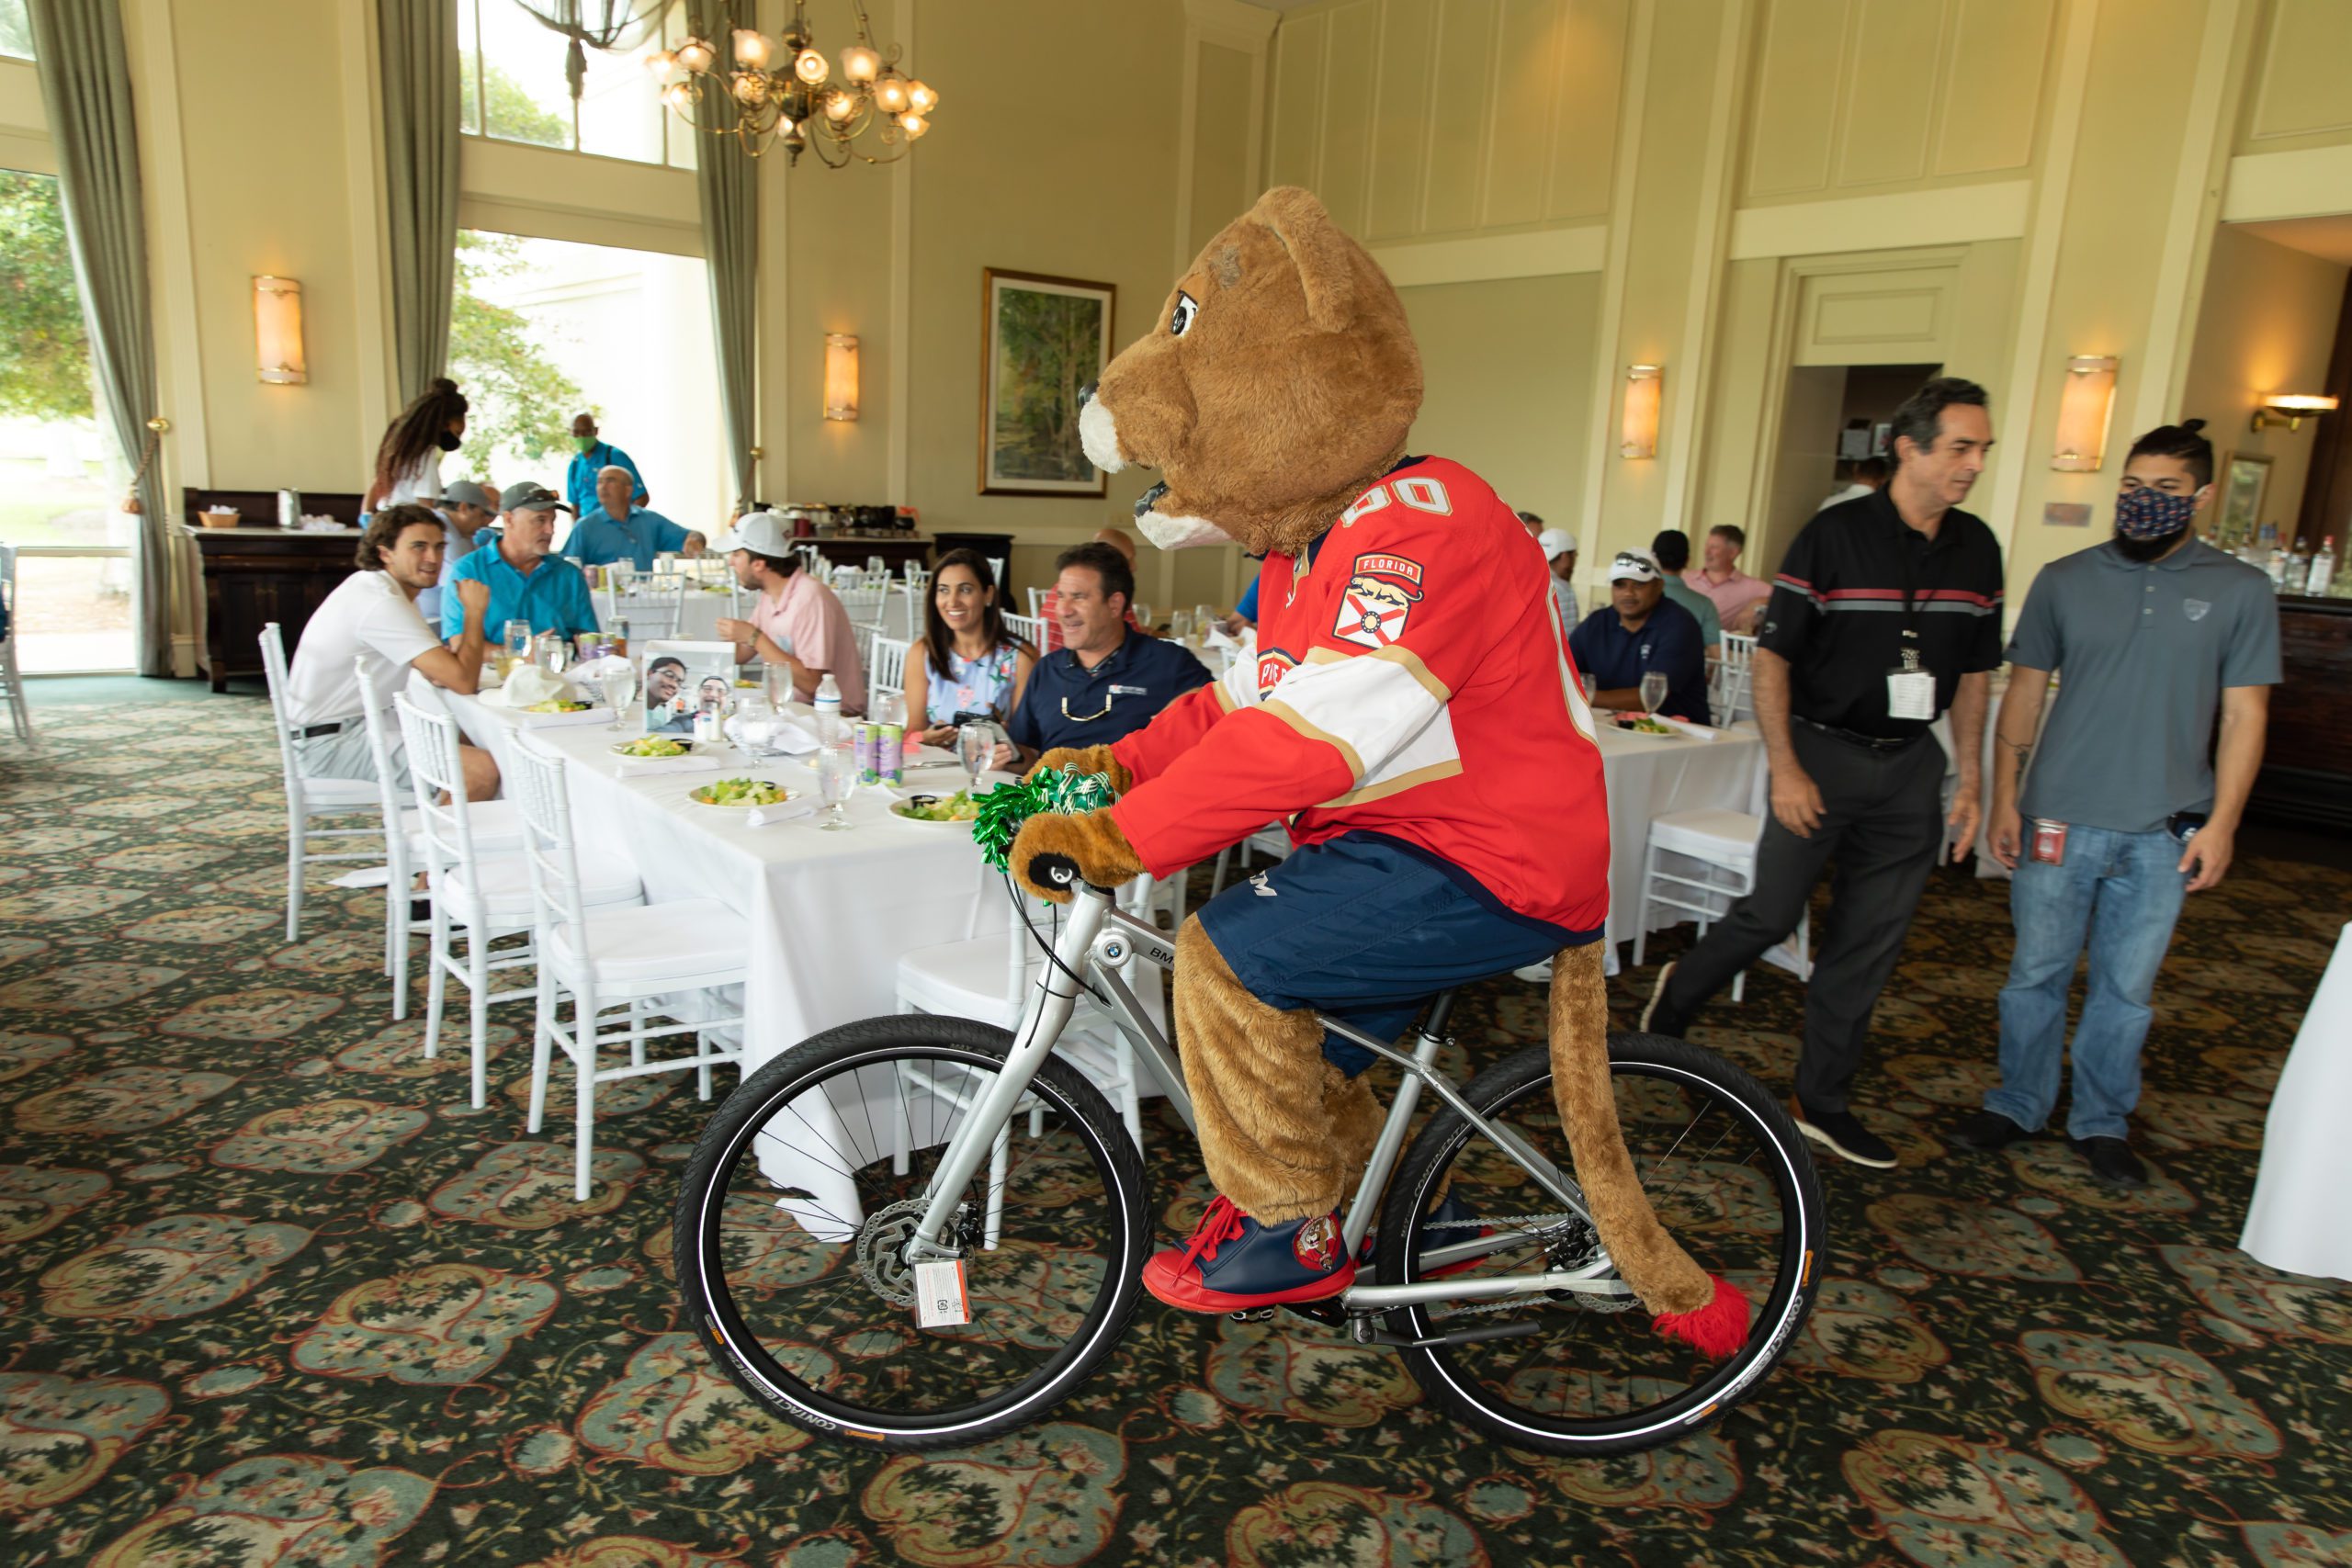 Stanley Panther mascot riding on a bike at a luncheon